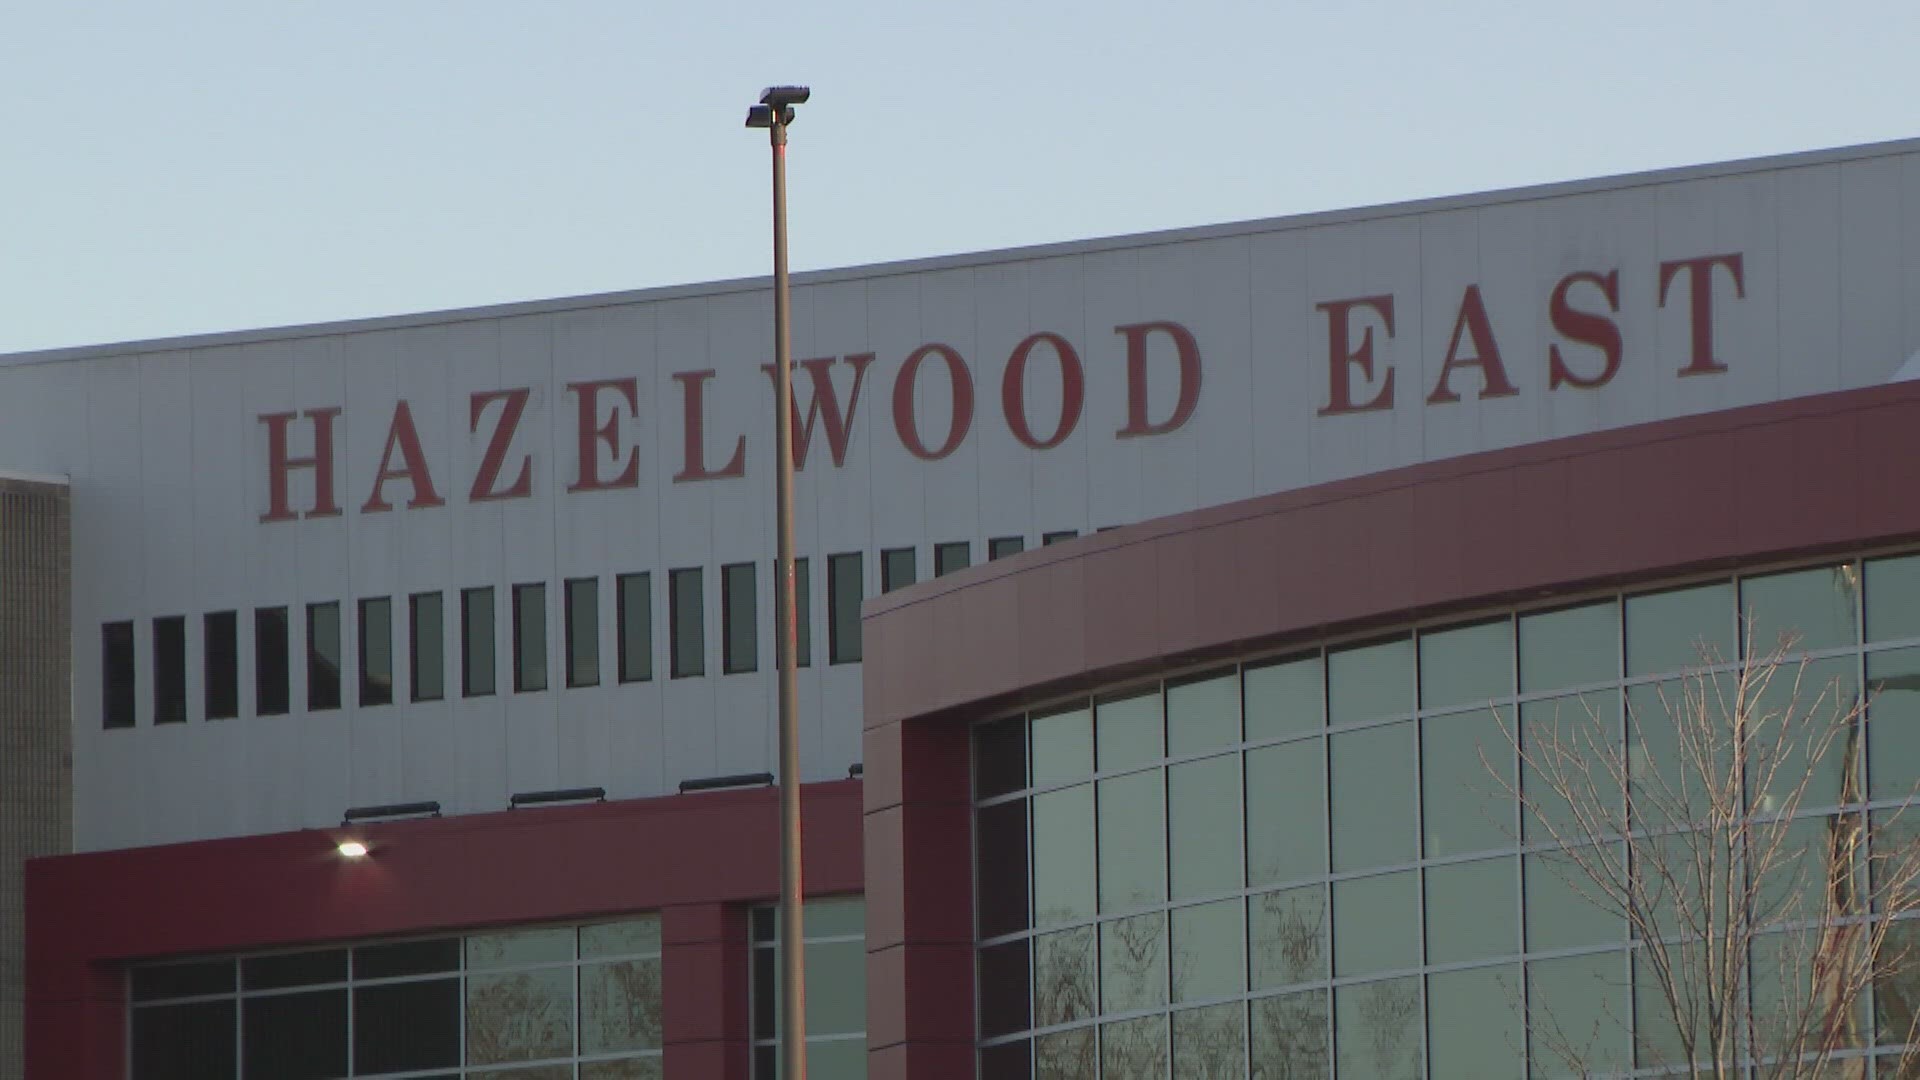 Attorney General Andrew Bailey is demanding Hazelwood School District's DEI documents by 5 p.m. Wednesday. It's related to a viral fight between two students.